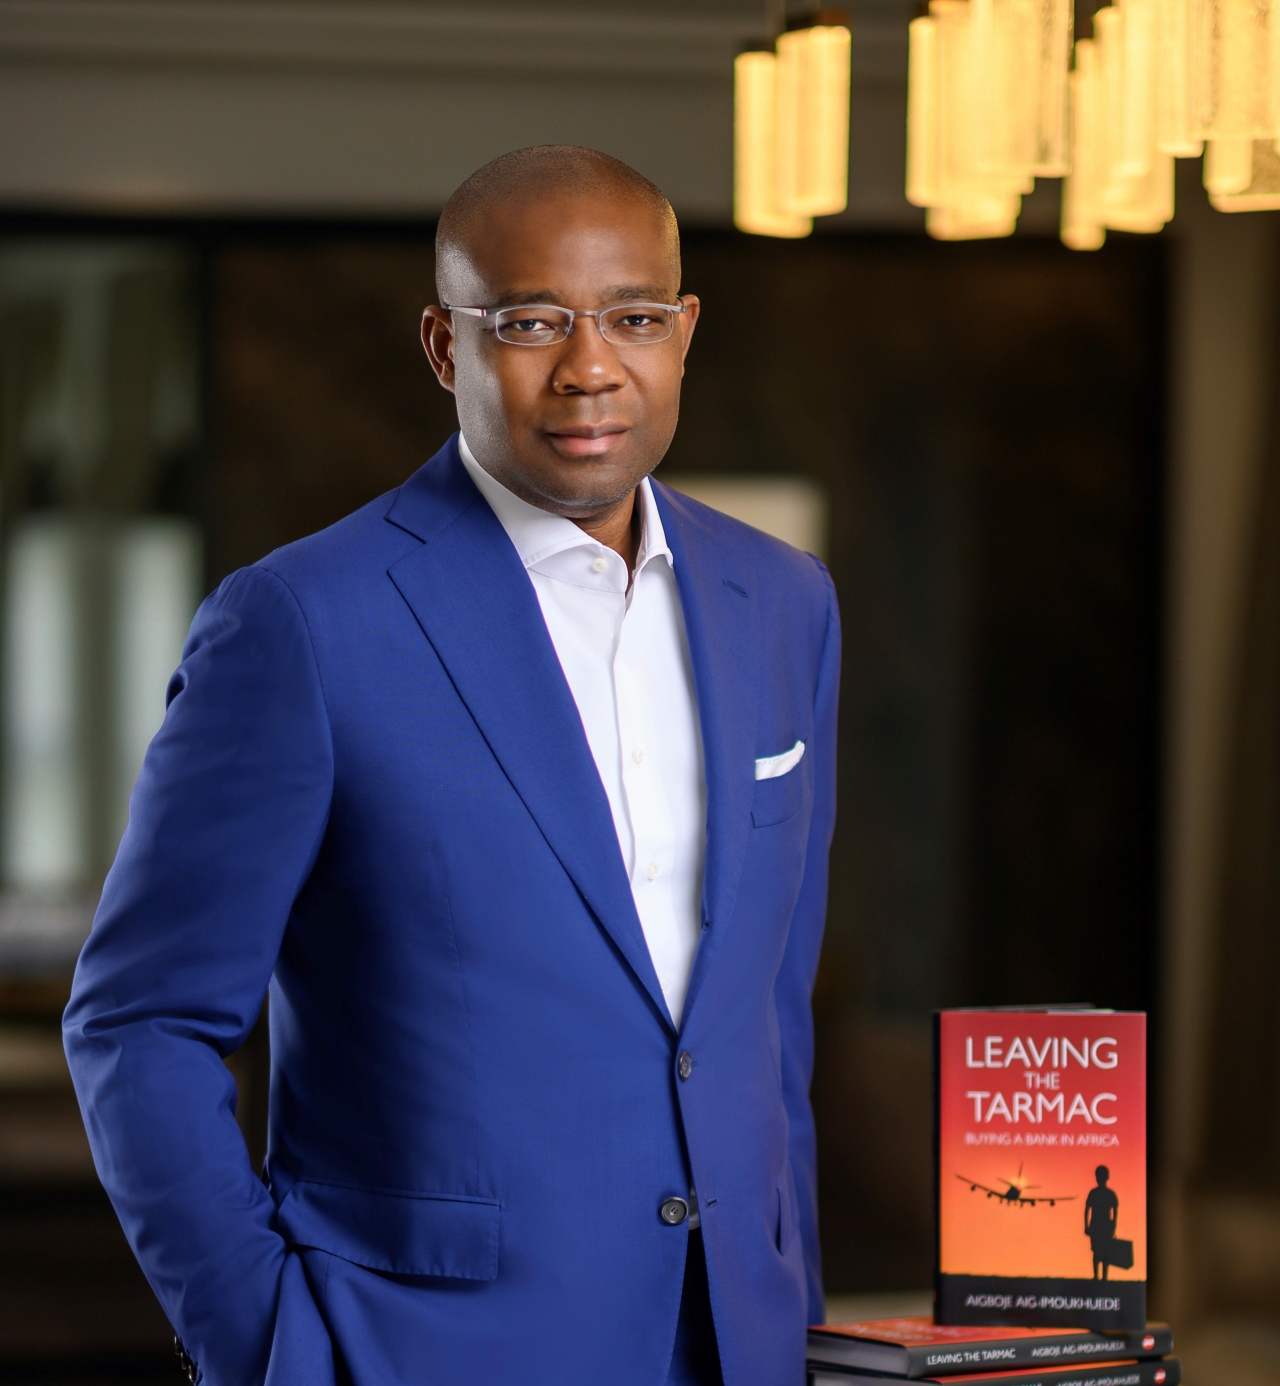 Aig-Imoukhuede’s book on banking shortlisted for BCA African Business Book of the Year